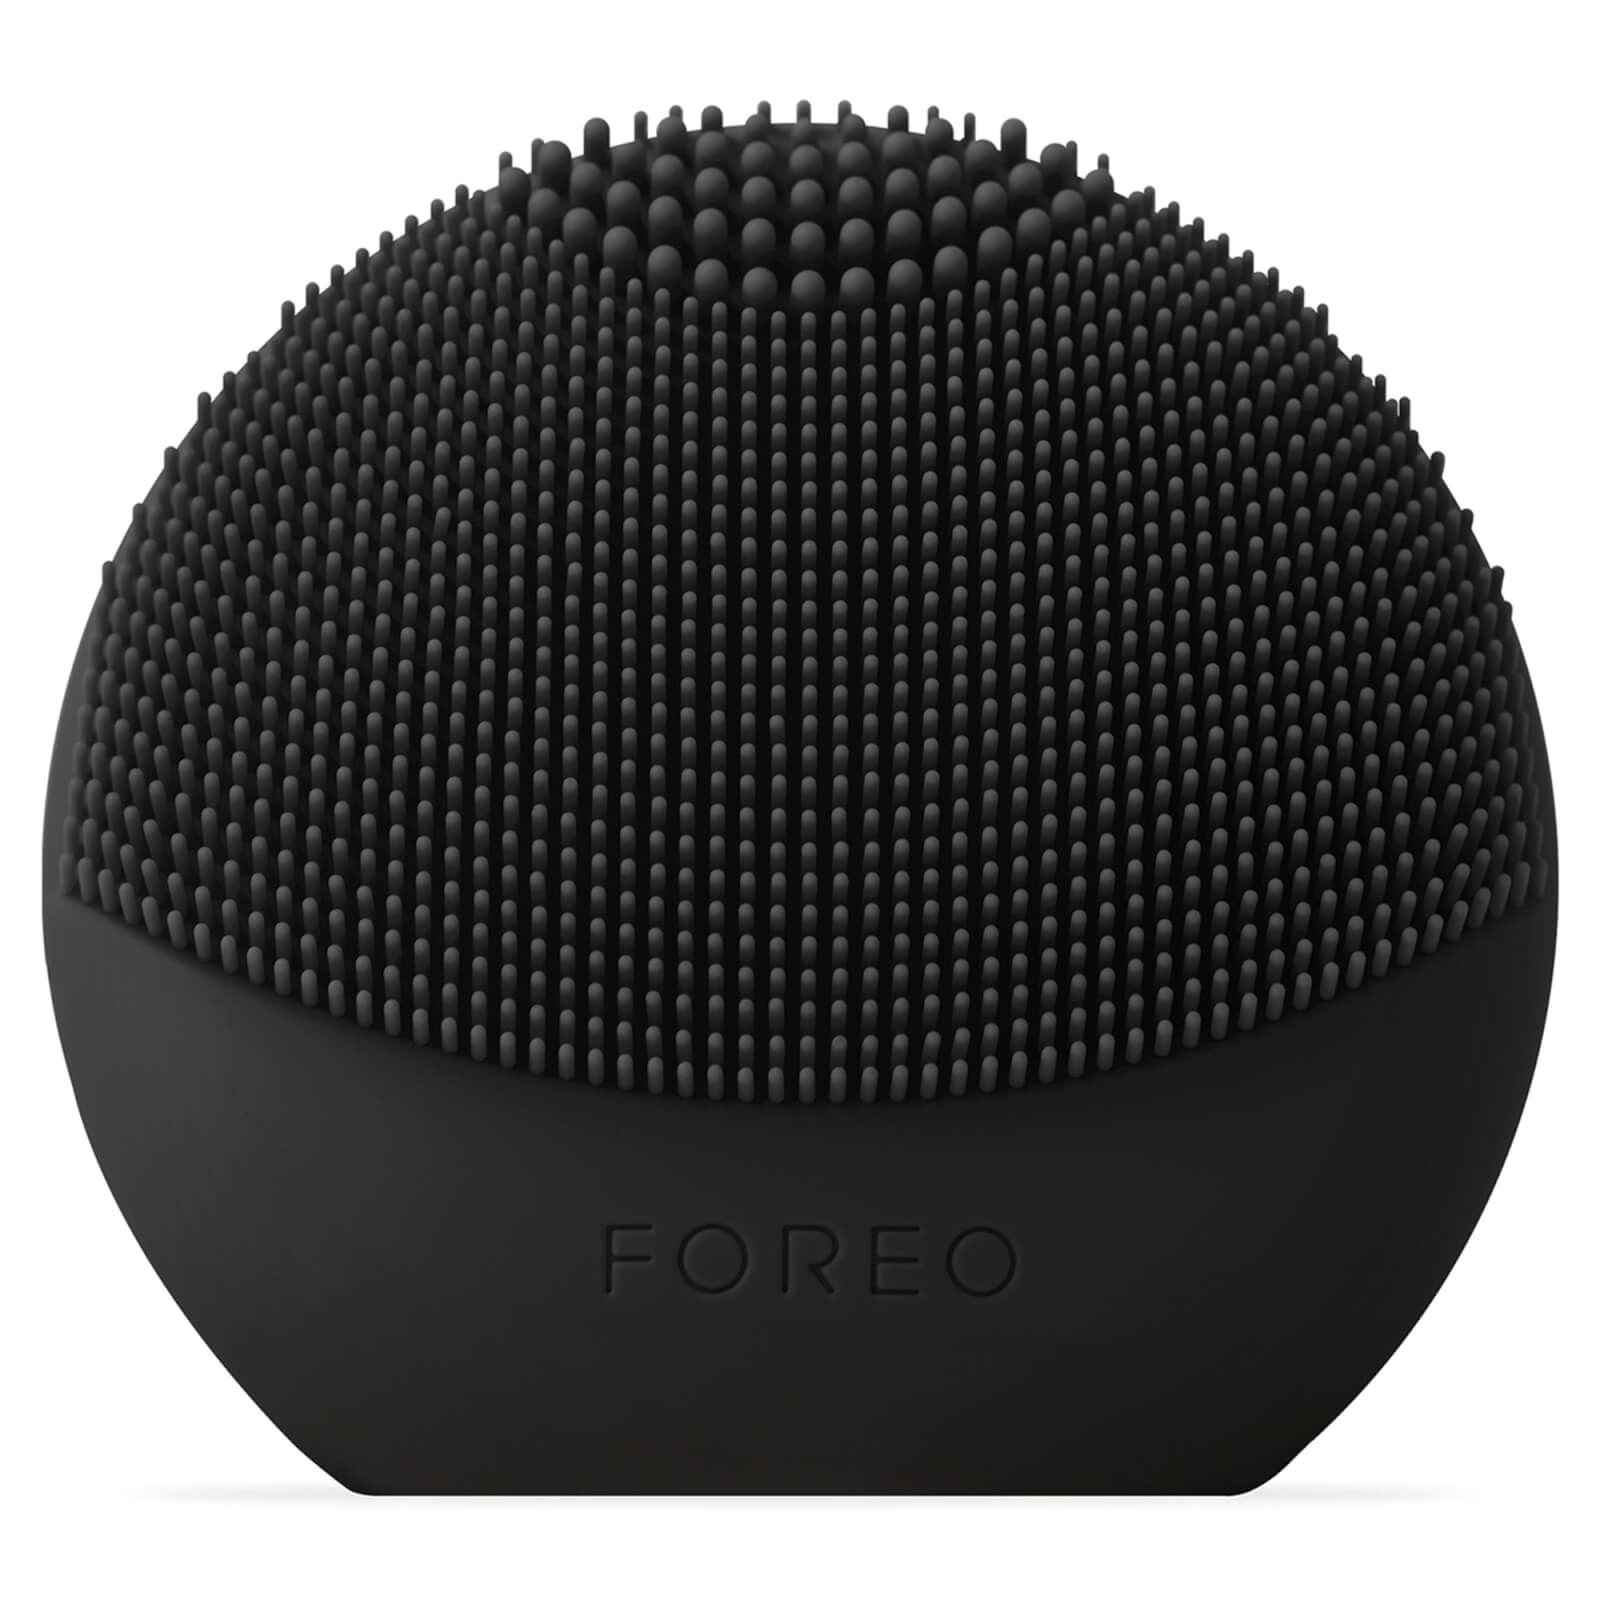 FOREO FOREO LUNA FOFO FACIAL BRUSH WITH SKIN ANALYSIS (VARIOUS SHADES),F7805